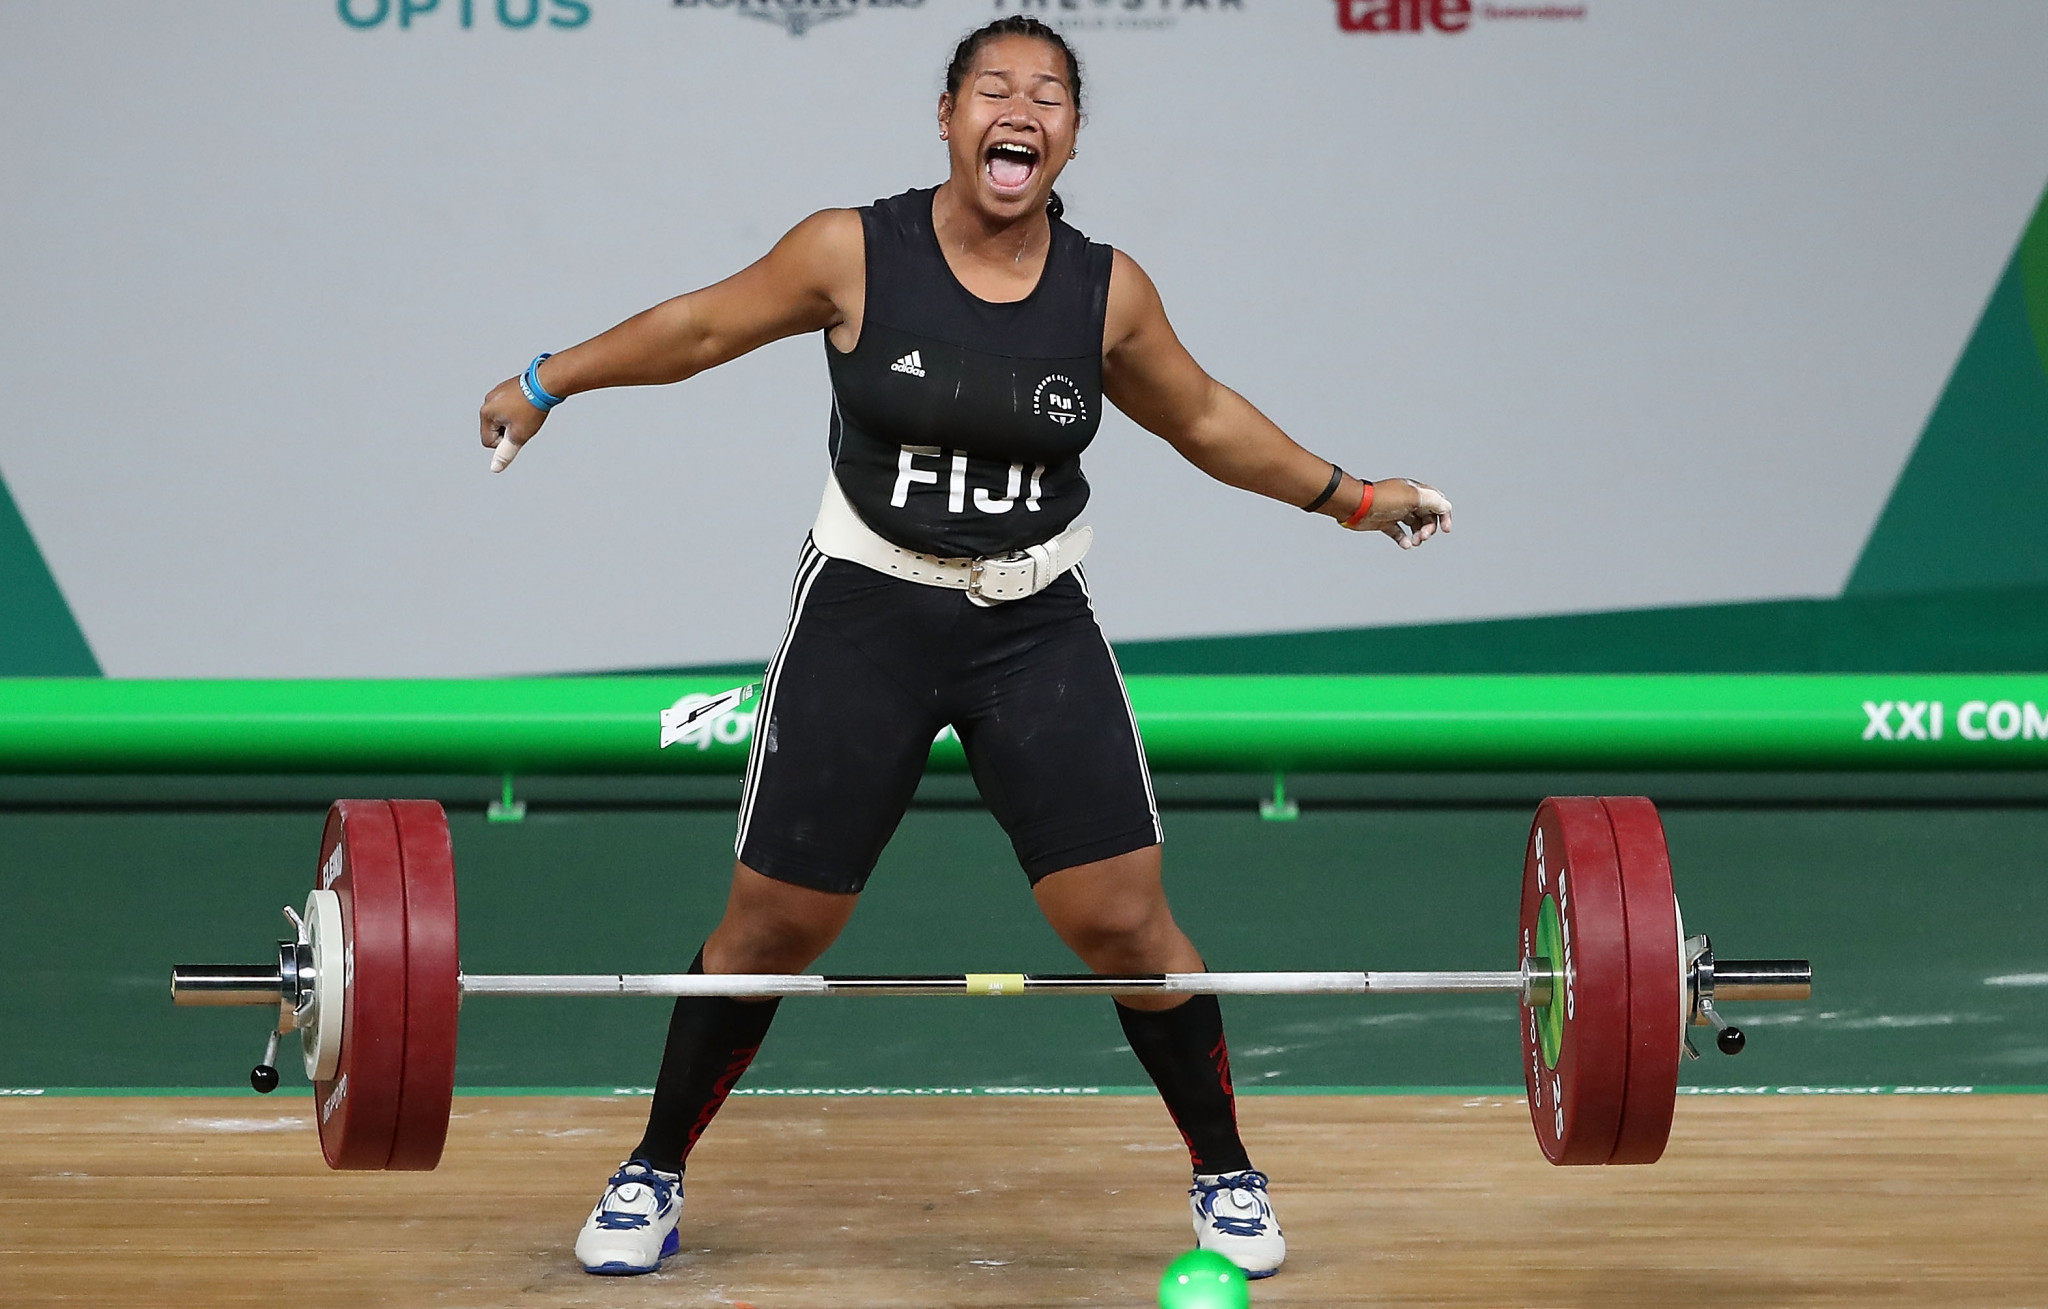 Eileen Cikamatana would have been a gold medal hope for Fiji ©Getty Images